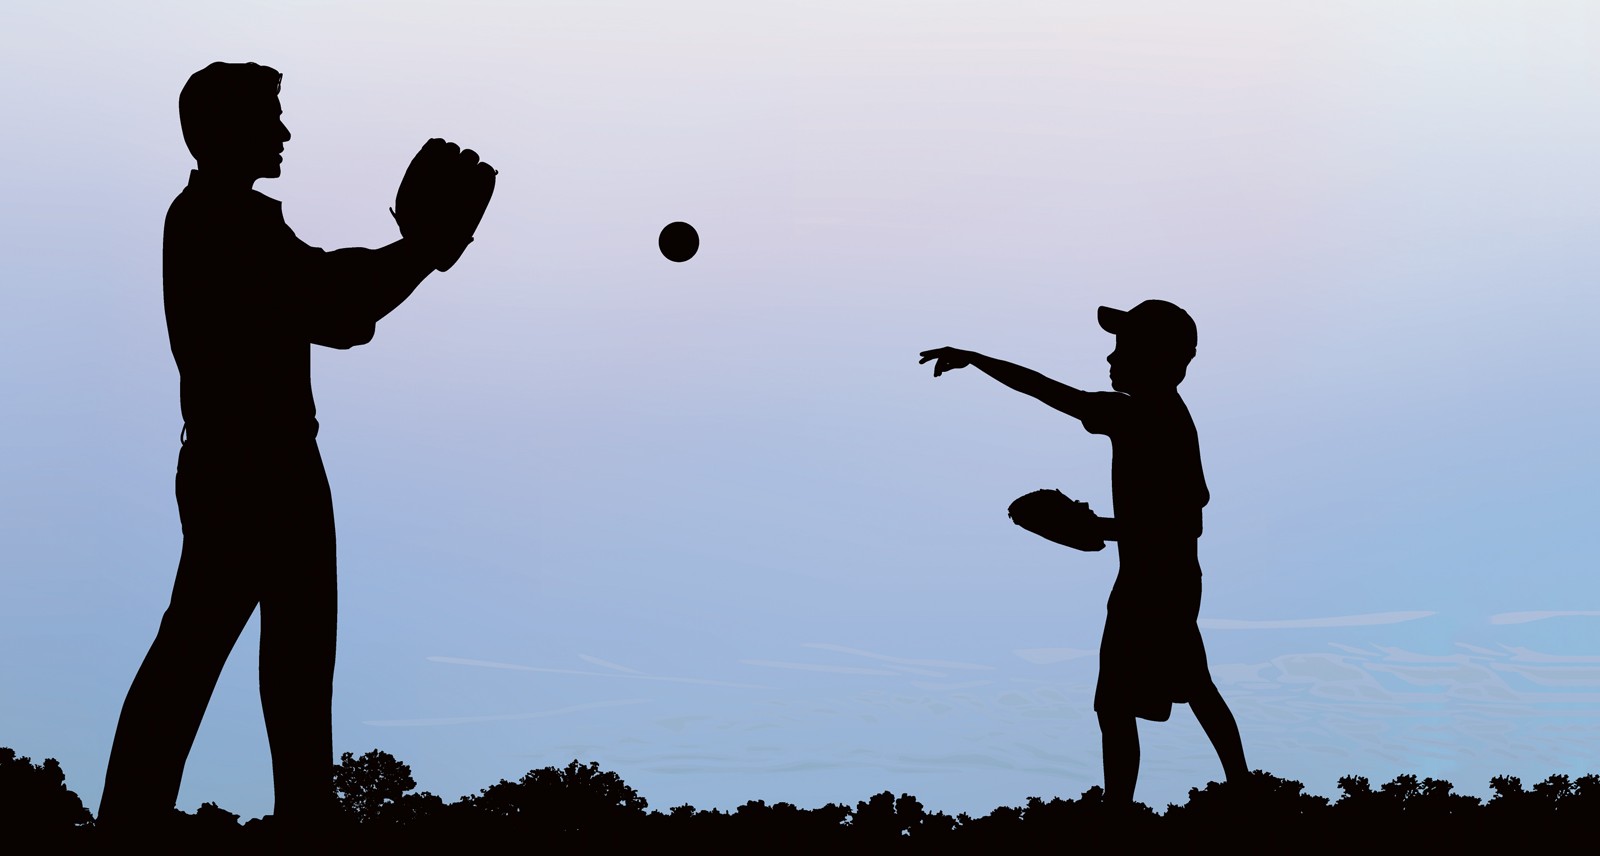 10. Little boy with blonde hair and baseball cap playing catch with his dad - wide 8